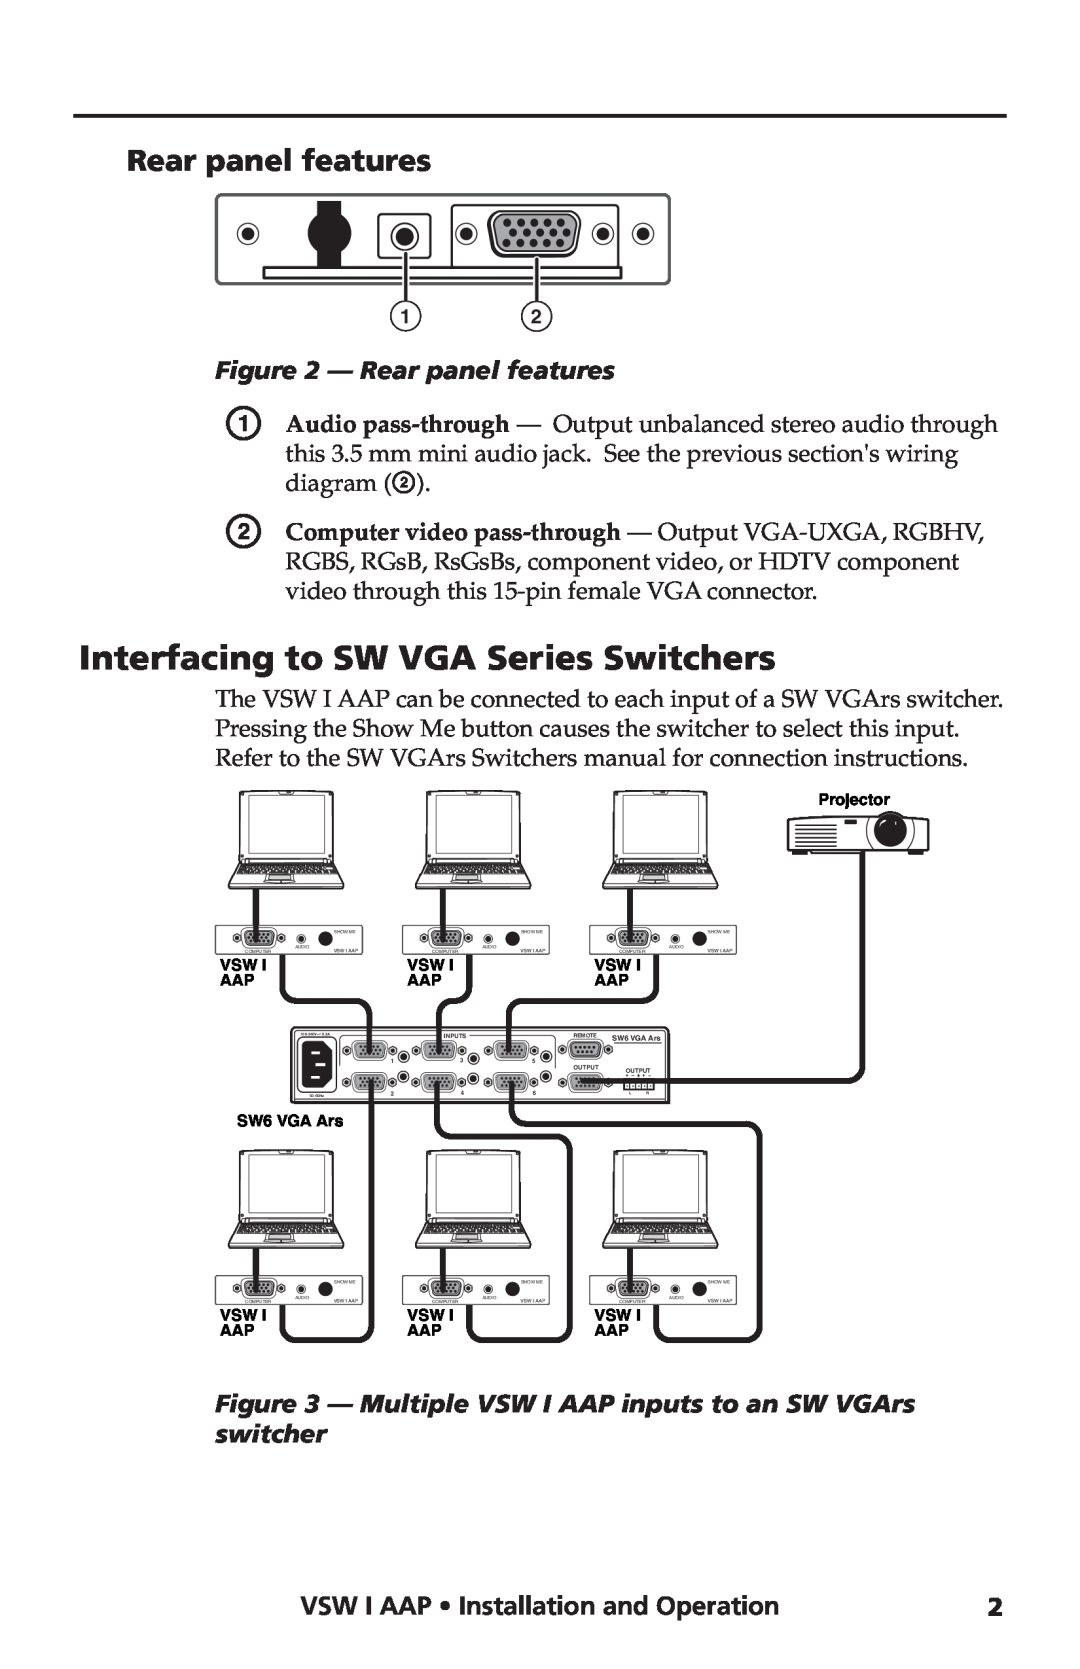 Extron electronic VSW I AAP manual Interfacing to SW VGA Series Switchers, Rear panel features 